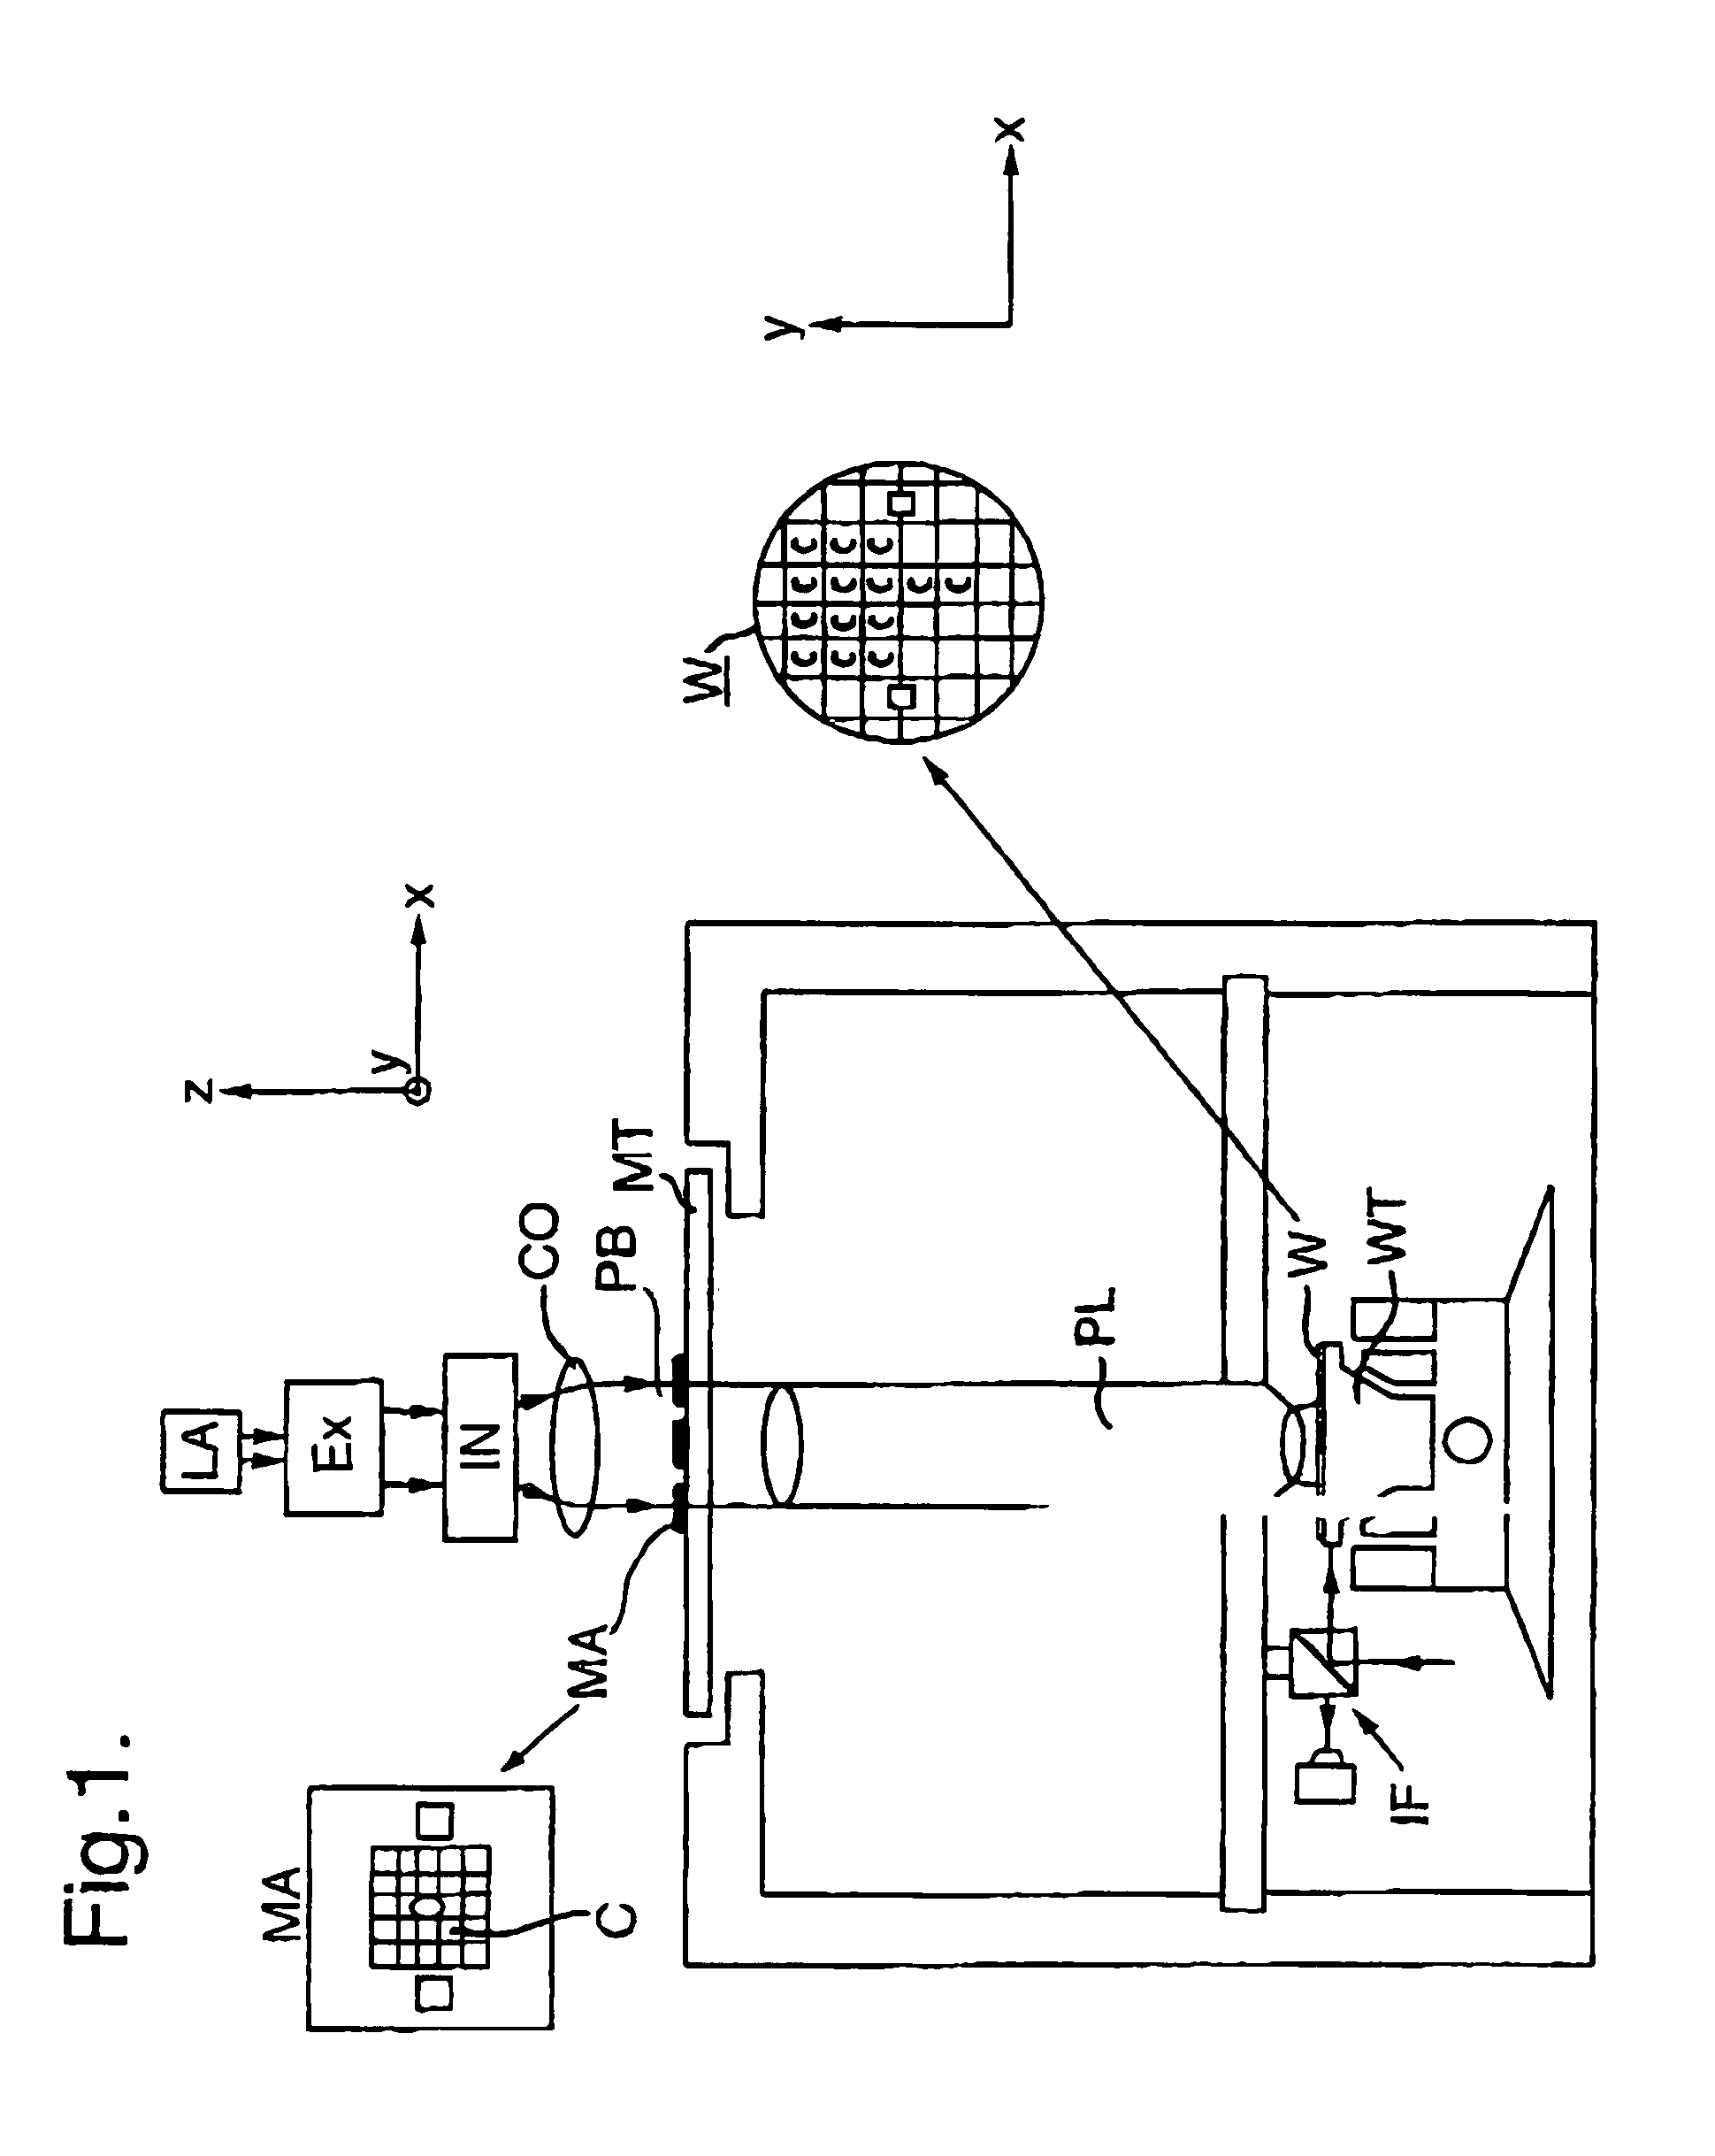 Object positioning method for a lithographic projection apparatus